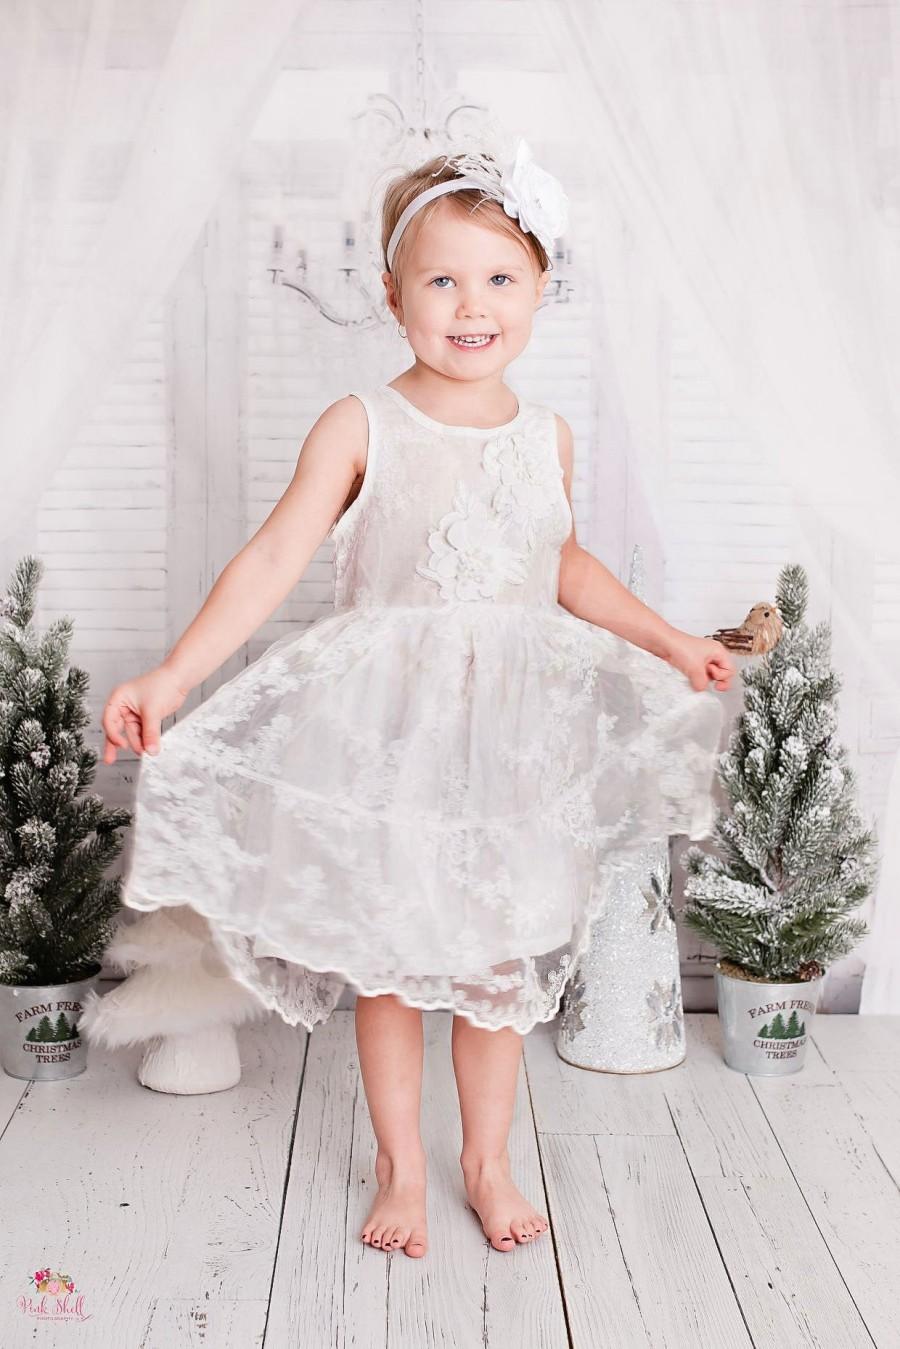 Mariage - Rustic White Flower Girl Dress, White Lace Dress- Baptism / Christening Dress, Country Style Flower Girl Dress